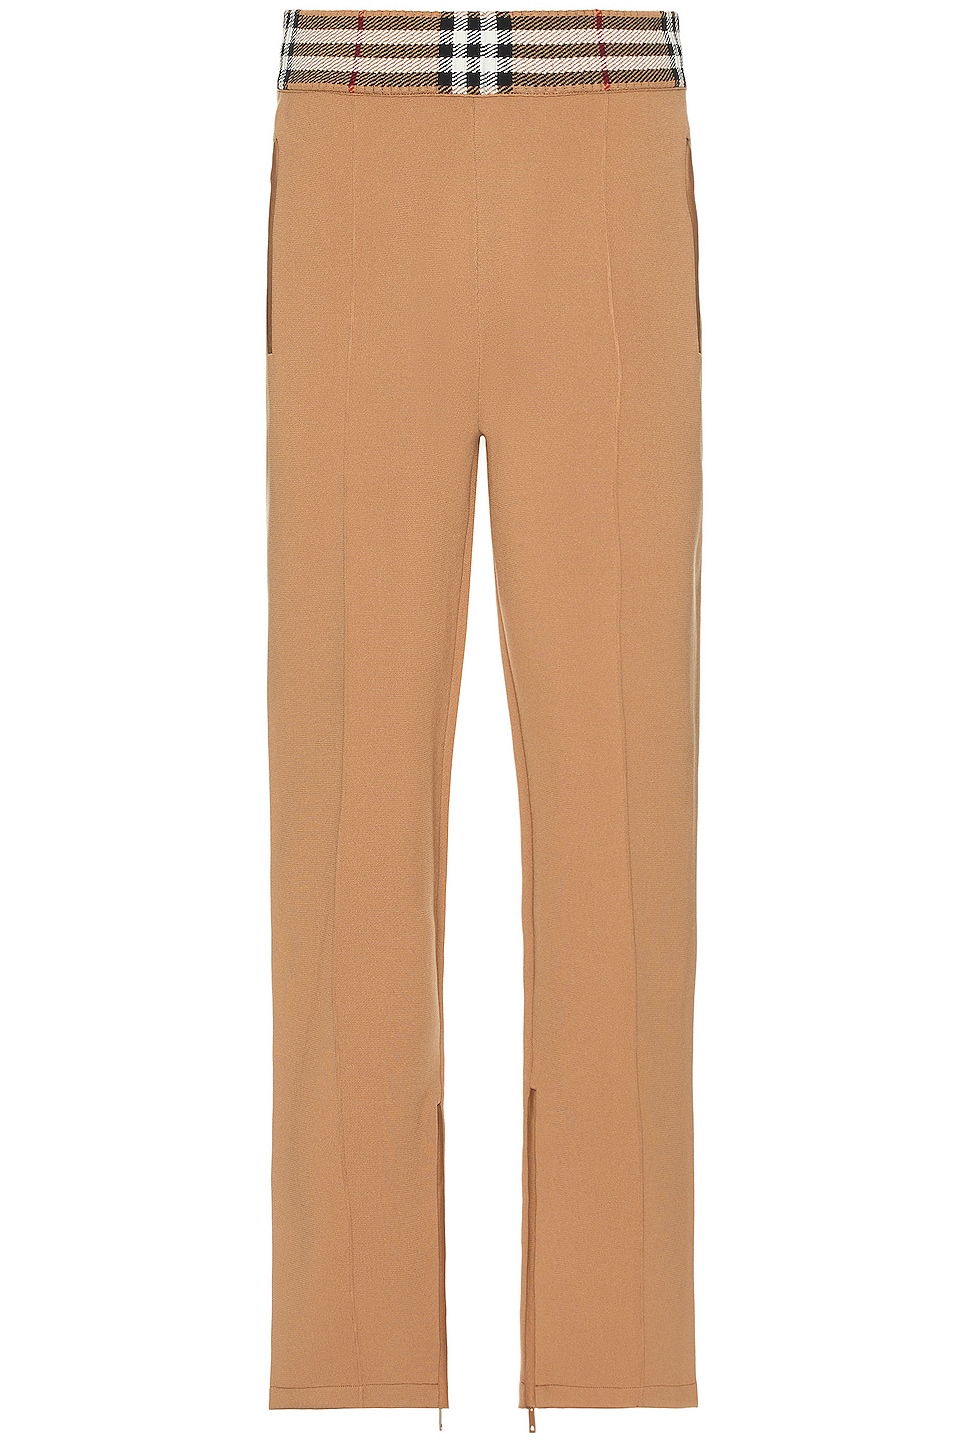 Image 1 of Burberry Dellow Pants in Camel